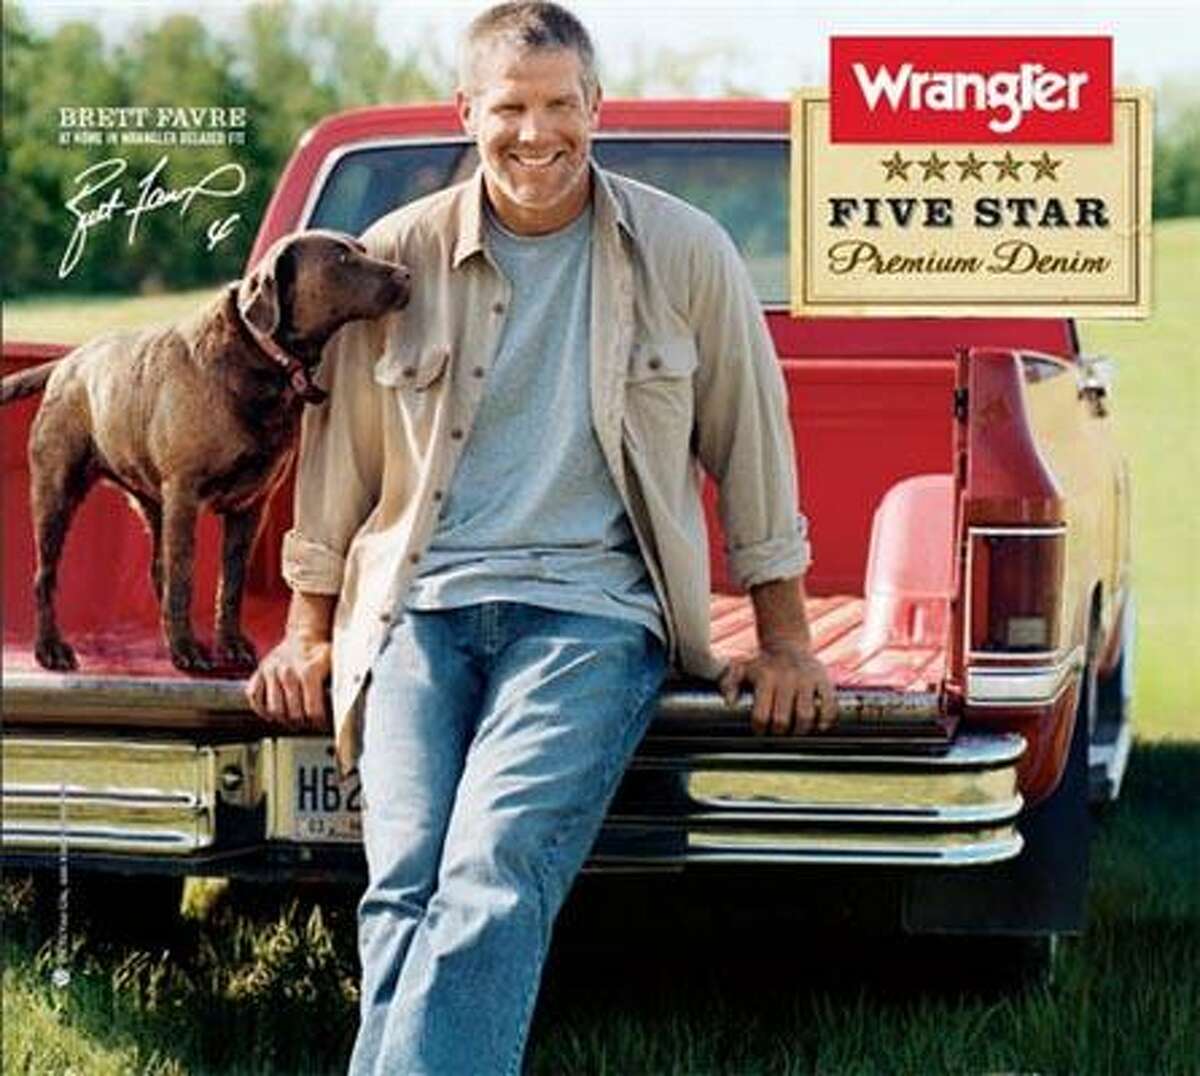 Wrangler, Snapper stand by Favre after scandal